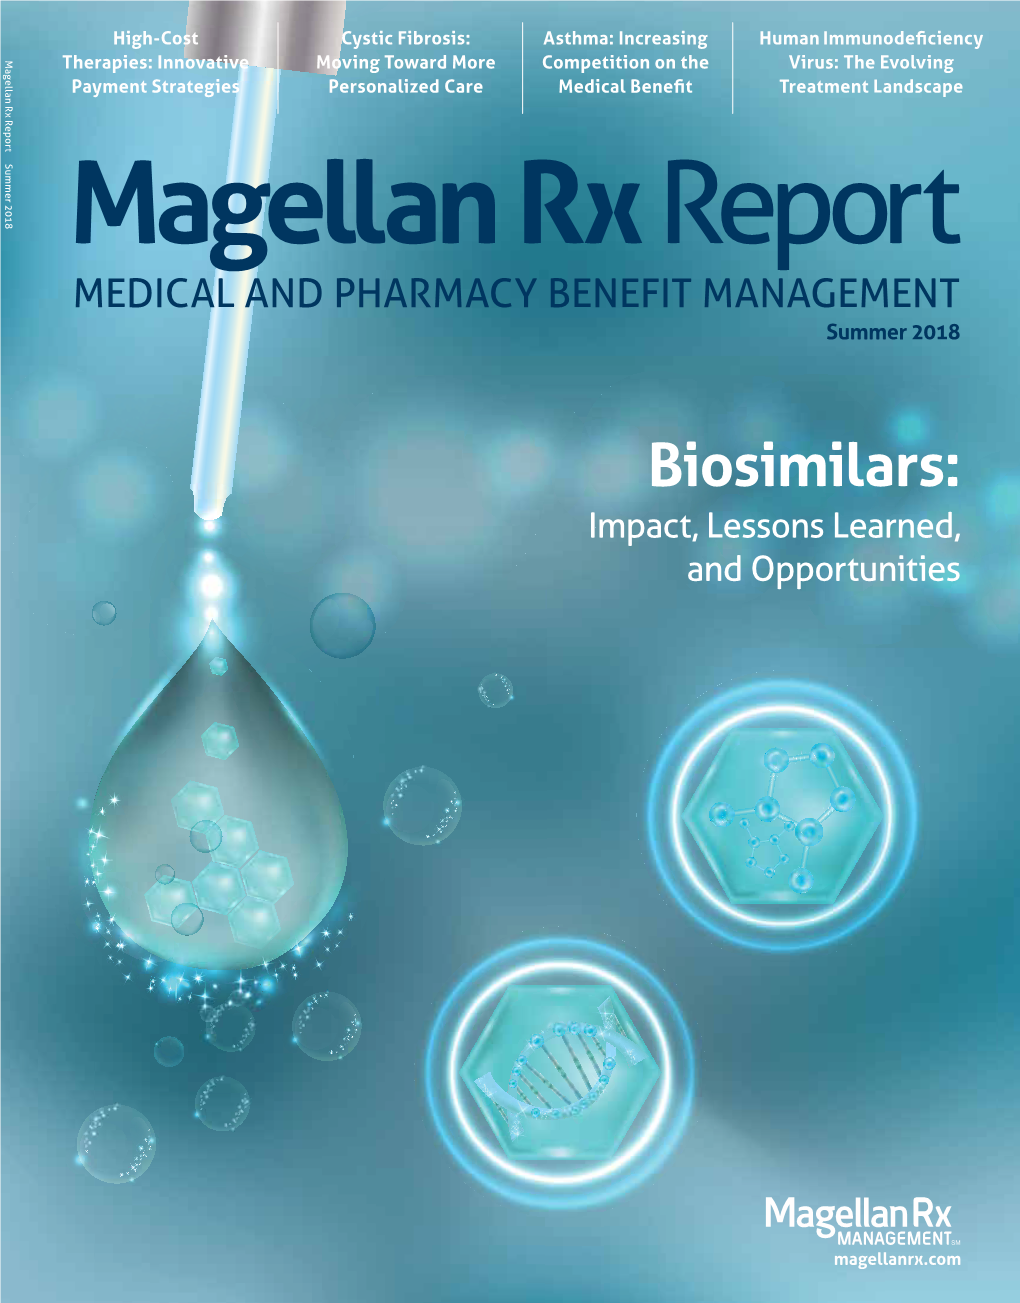 Biosimilars: Impact, Lessons Learned, and Opportunities